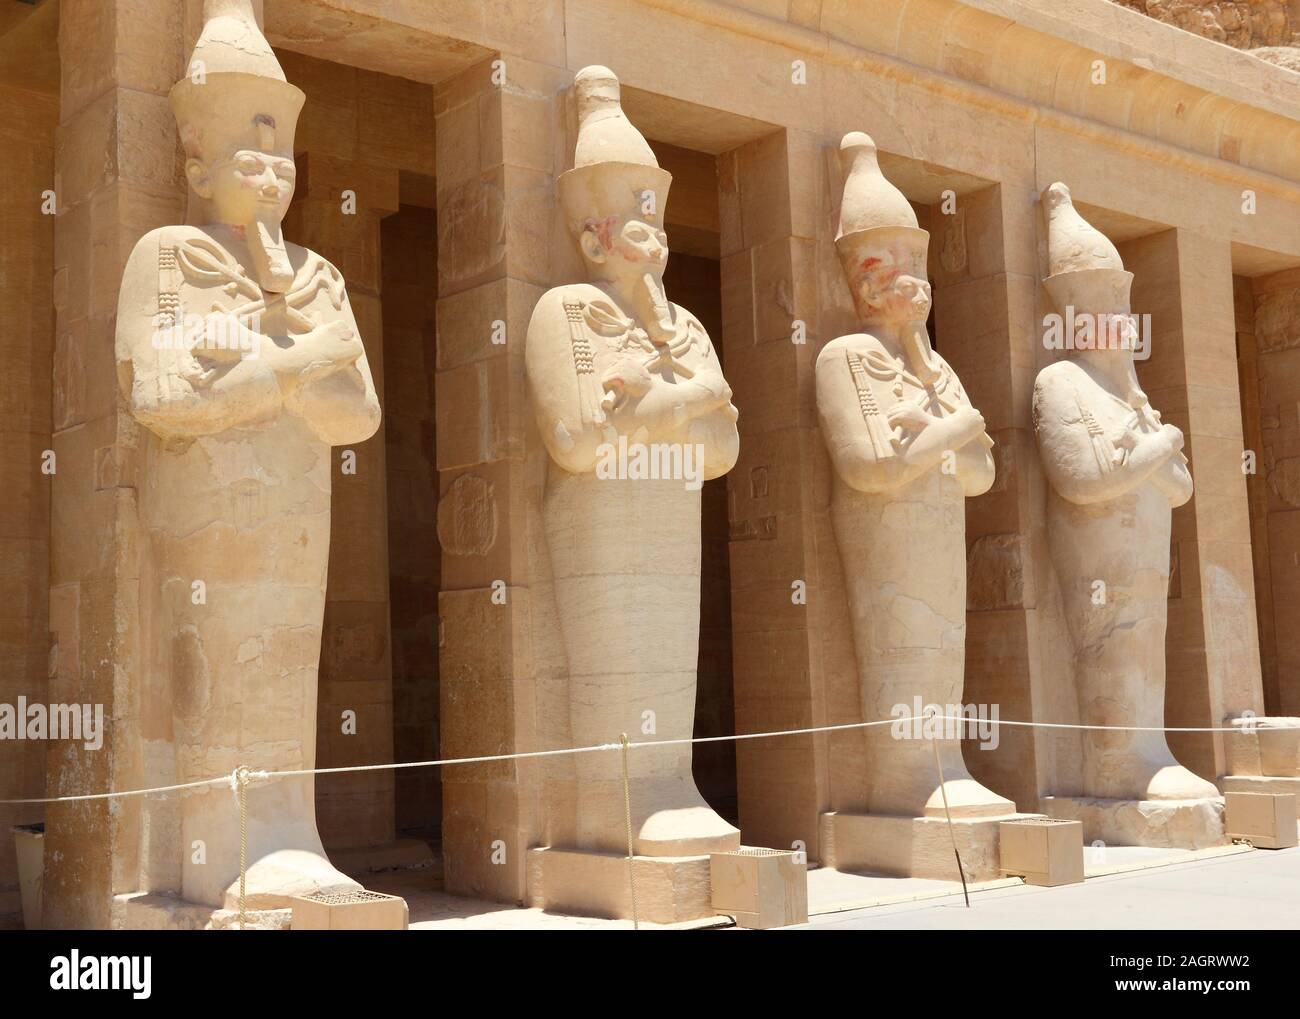 A row of statues of Queen Hatshepsut as Osiris, the god of the dead, at her temple in Luxor (Thebes), Egypt. Stock Photo